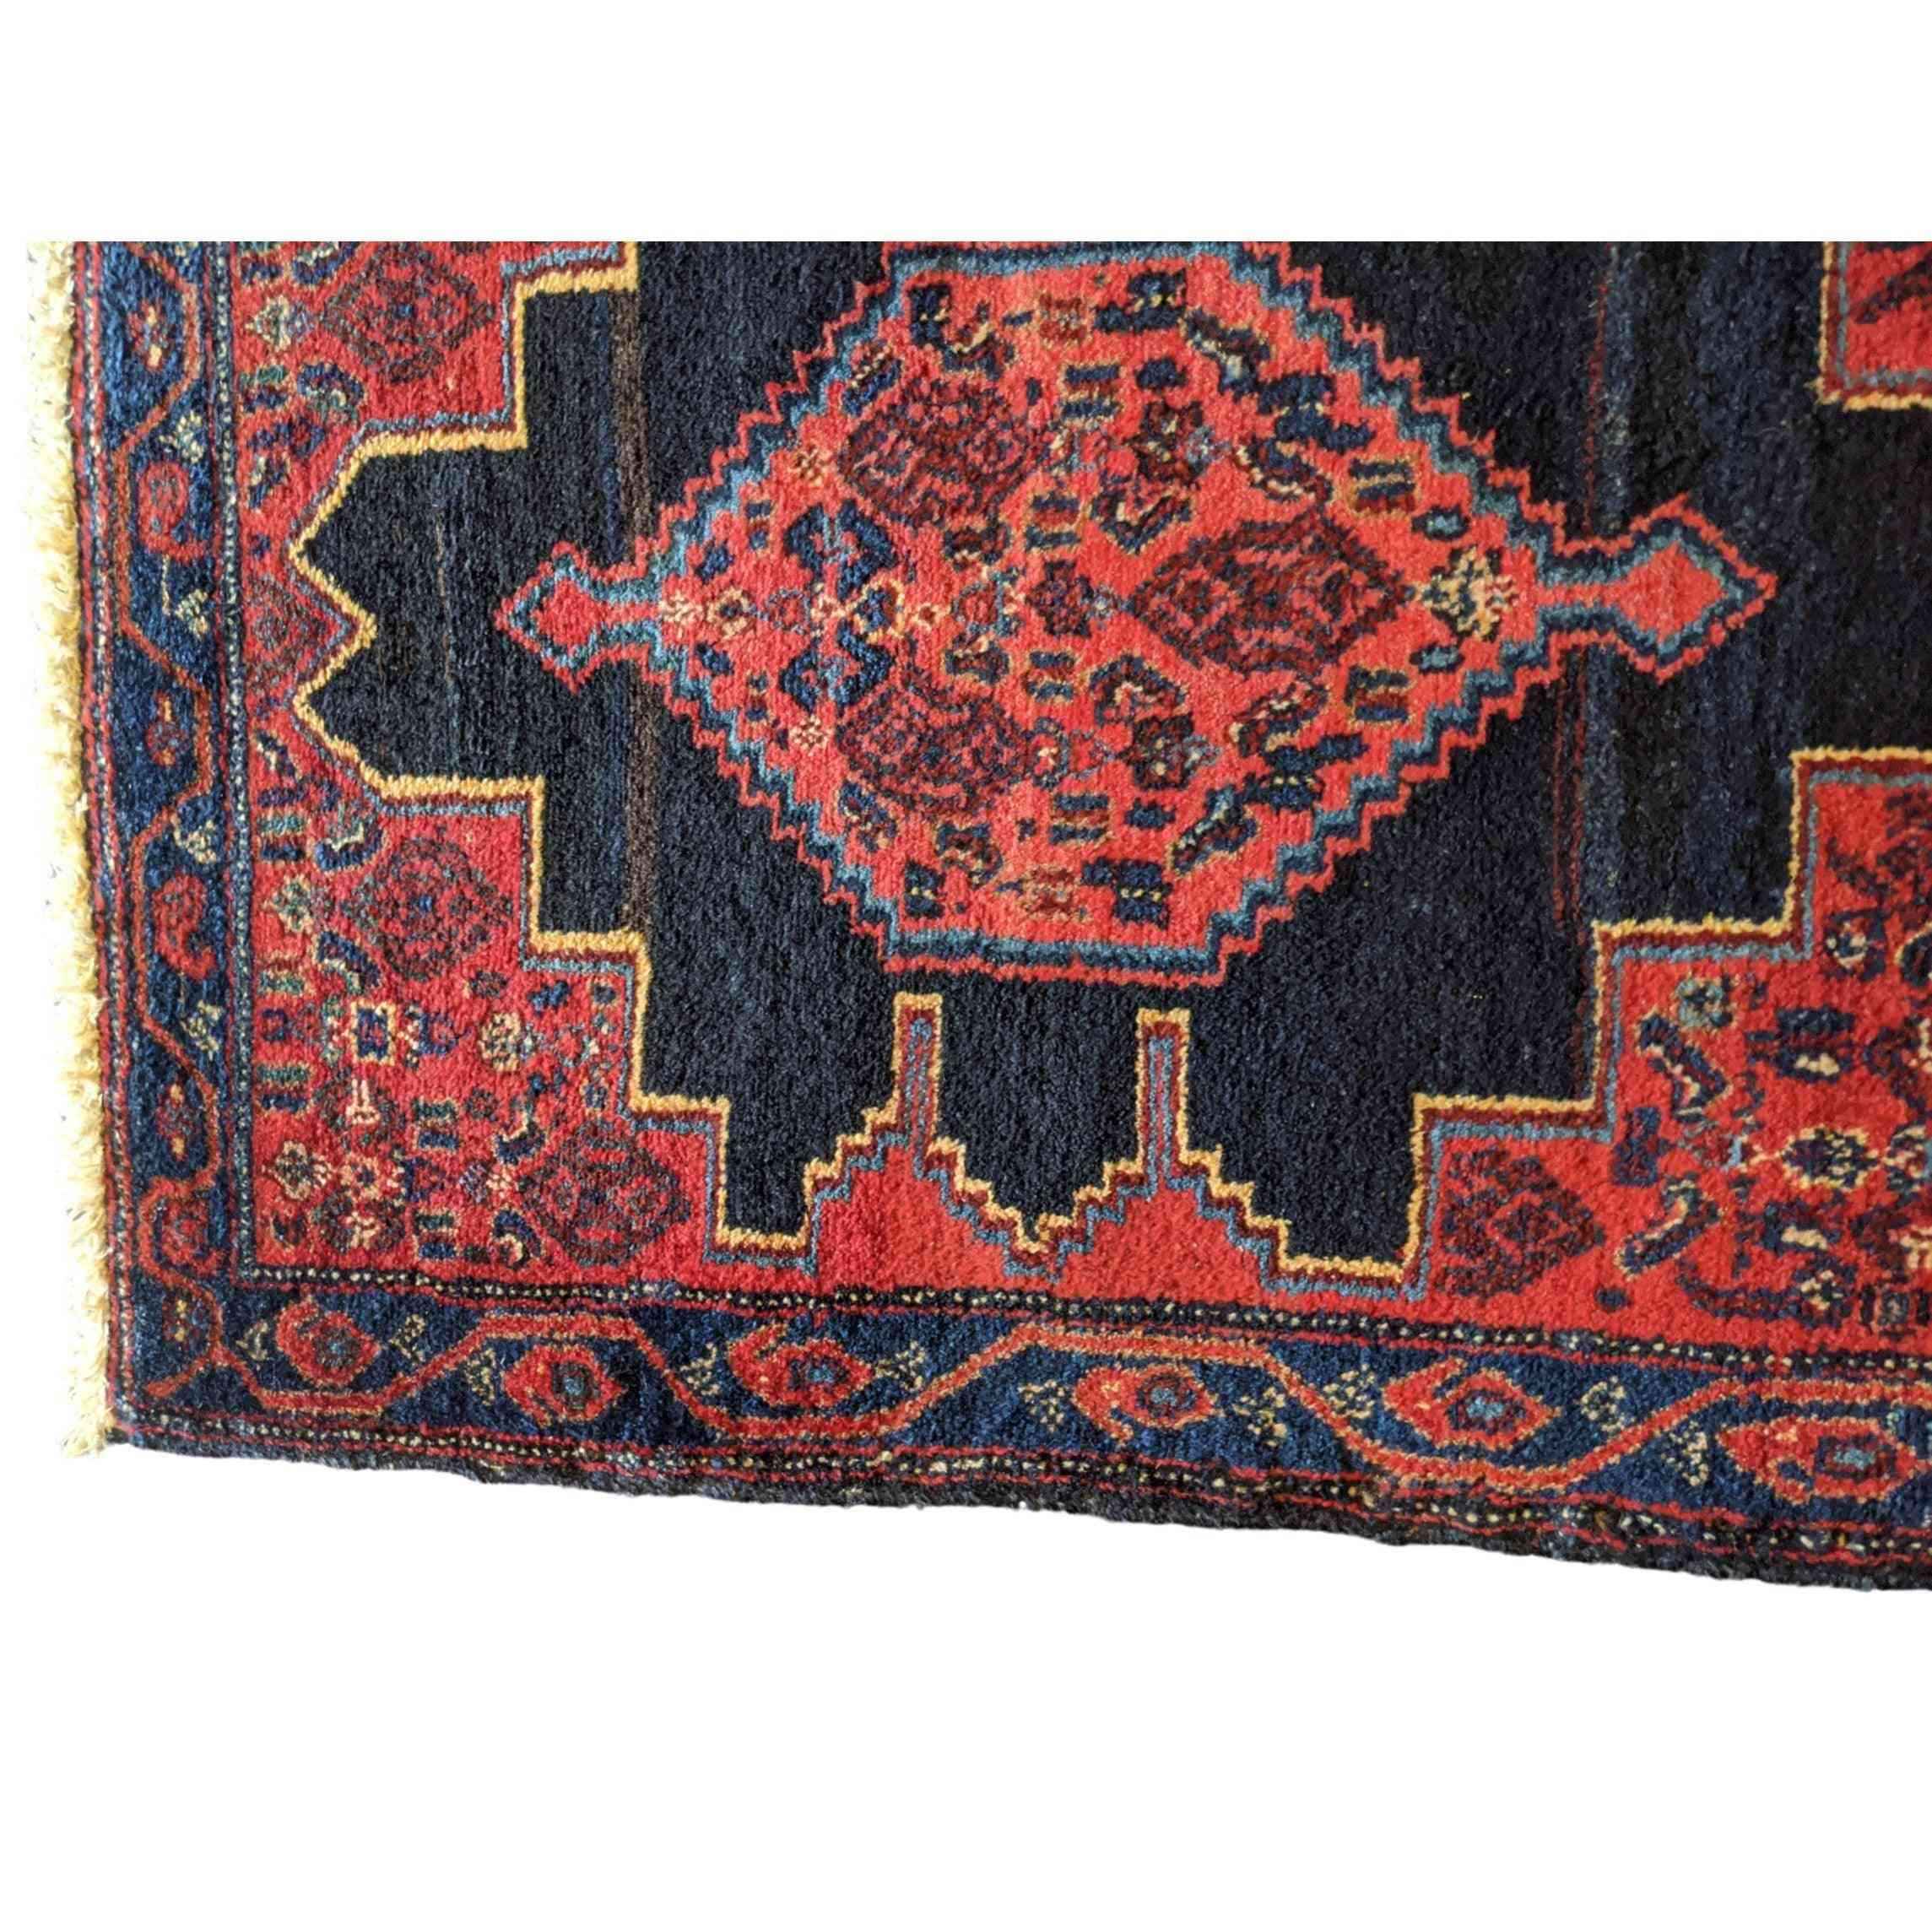 82 x 64 cm Persian Senneh Red Small Rug - Rugmaster